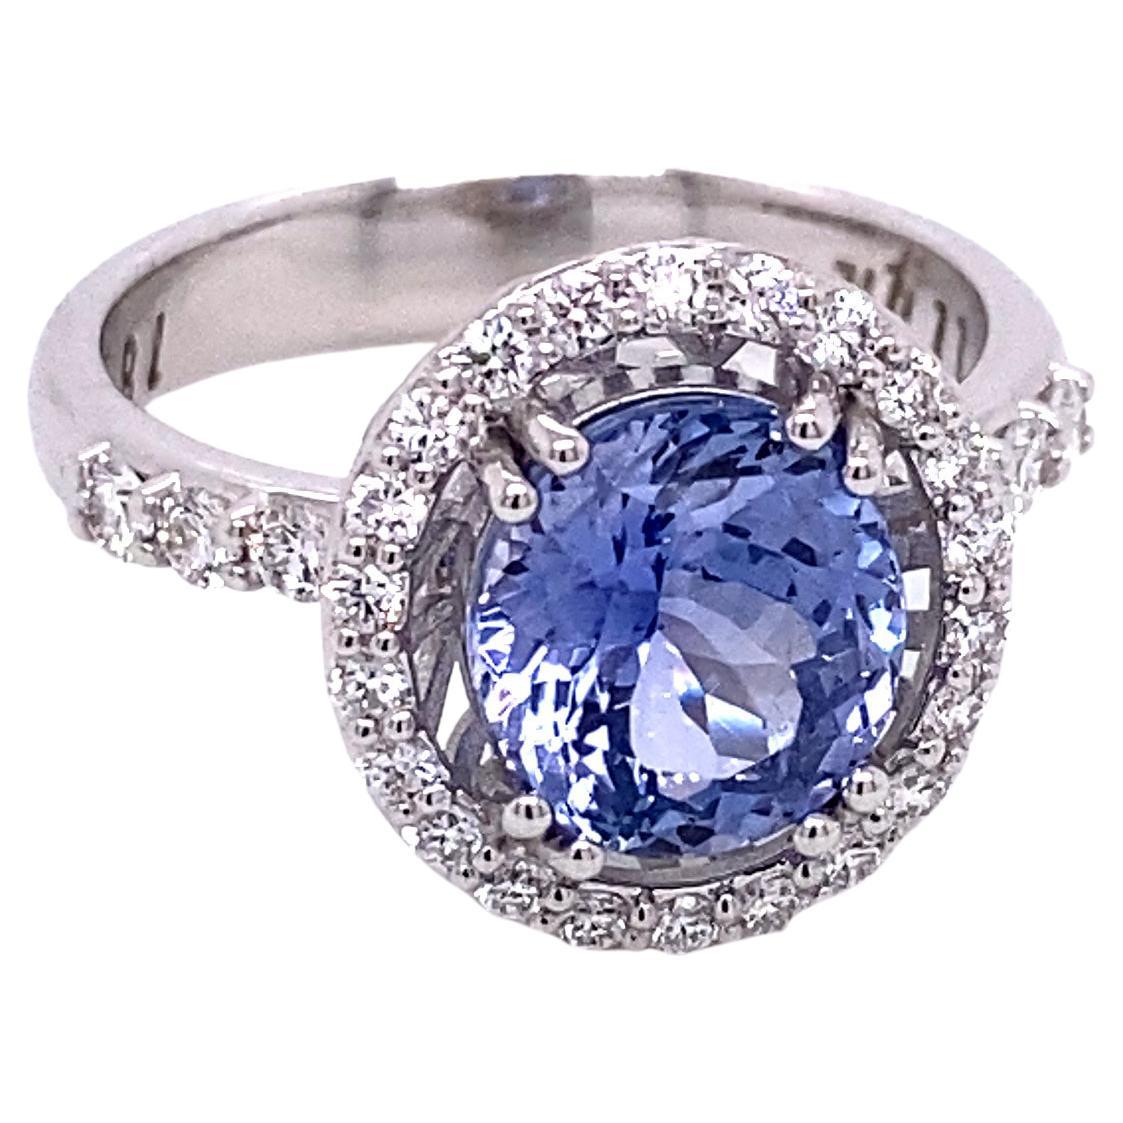 18k White Gold Pastel Blue Sapphire Ring with a White Diamond Halo